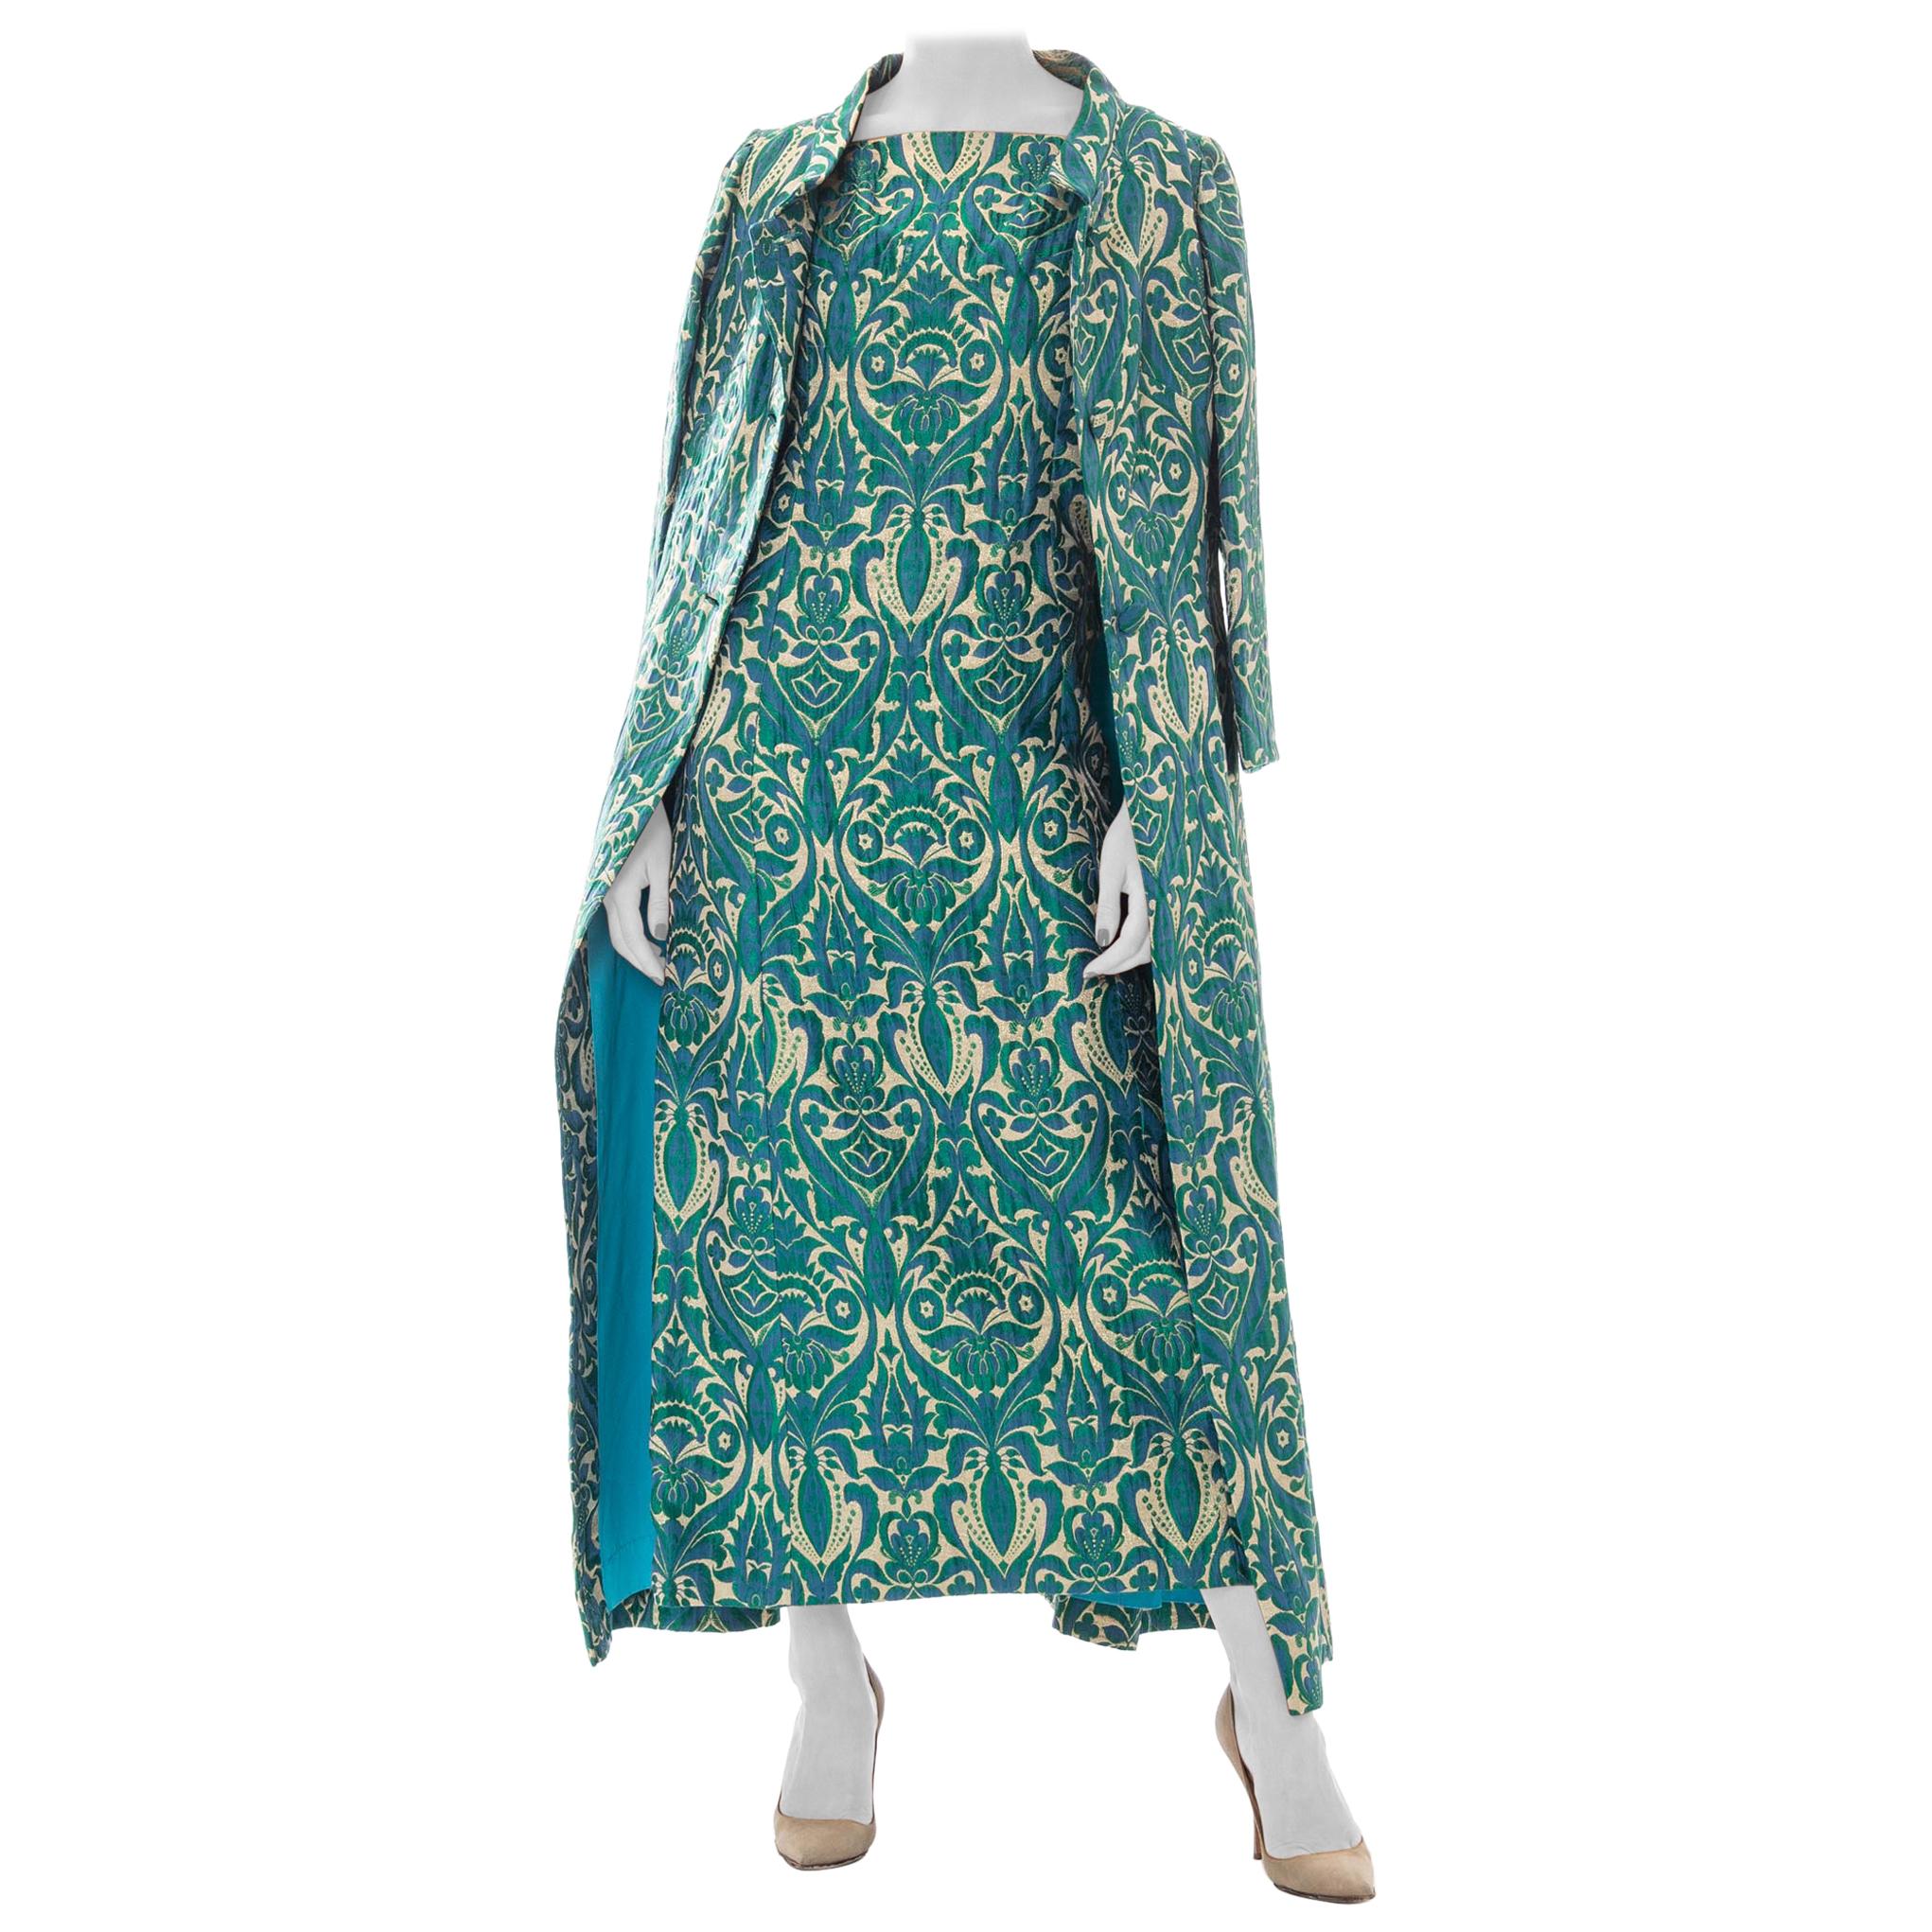 1960S Blue & Green Gold Lamé Rayon/Lurex Brocade Gown With Matching Evening Coat